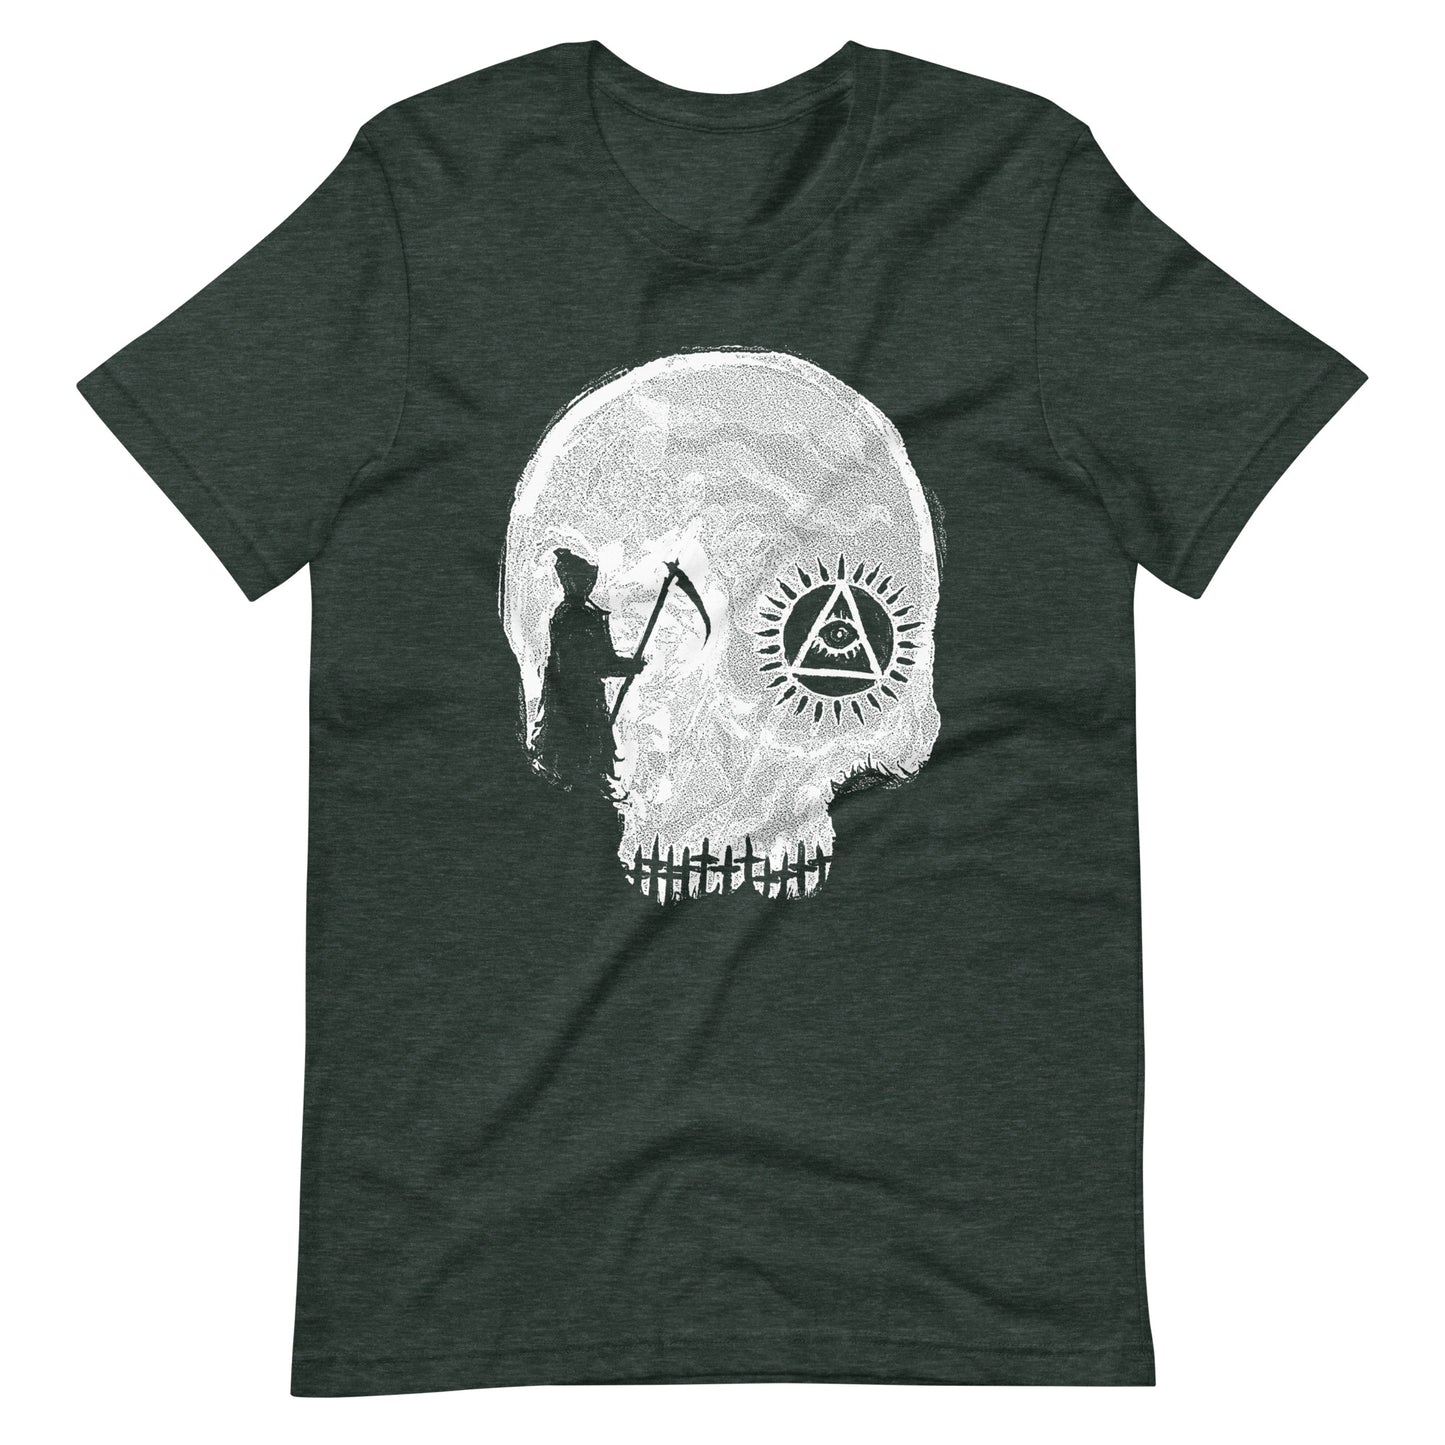 Death Row - Men's t-shirt - Heather Forest Front